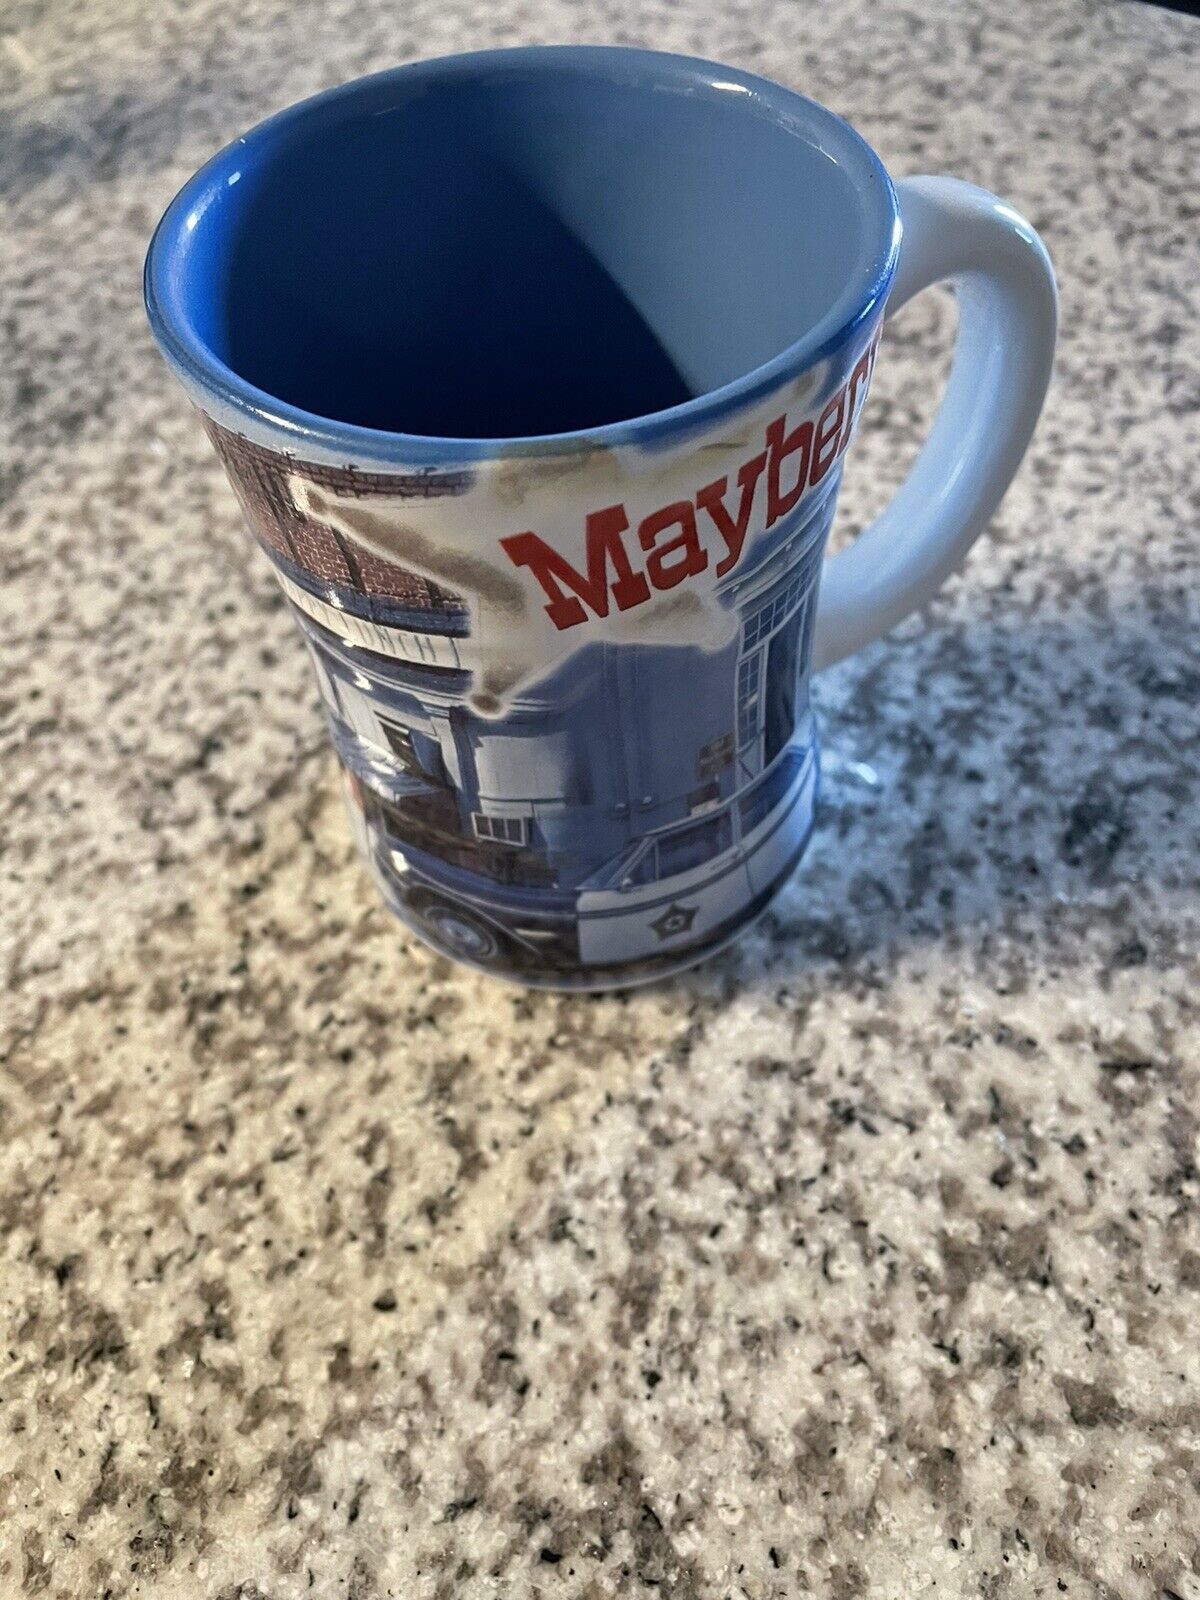 Mayberry Andy Griffith Show Mug